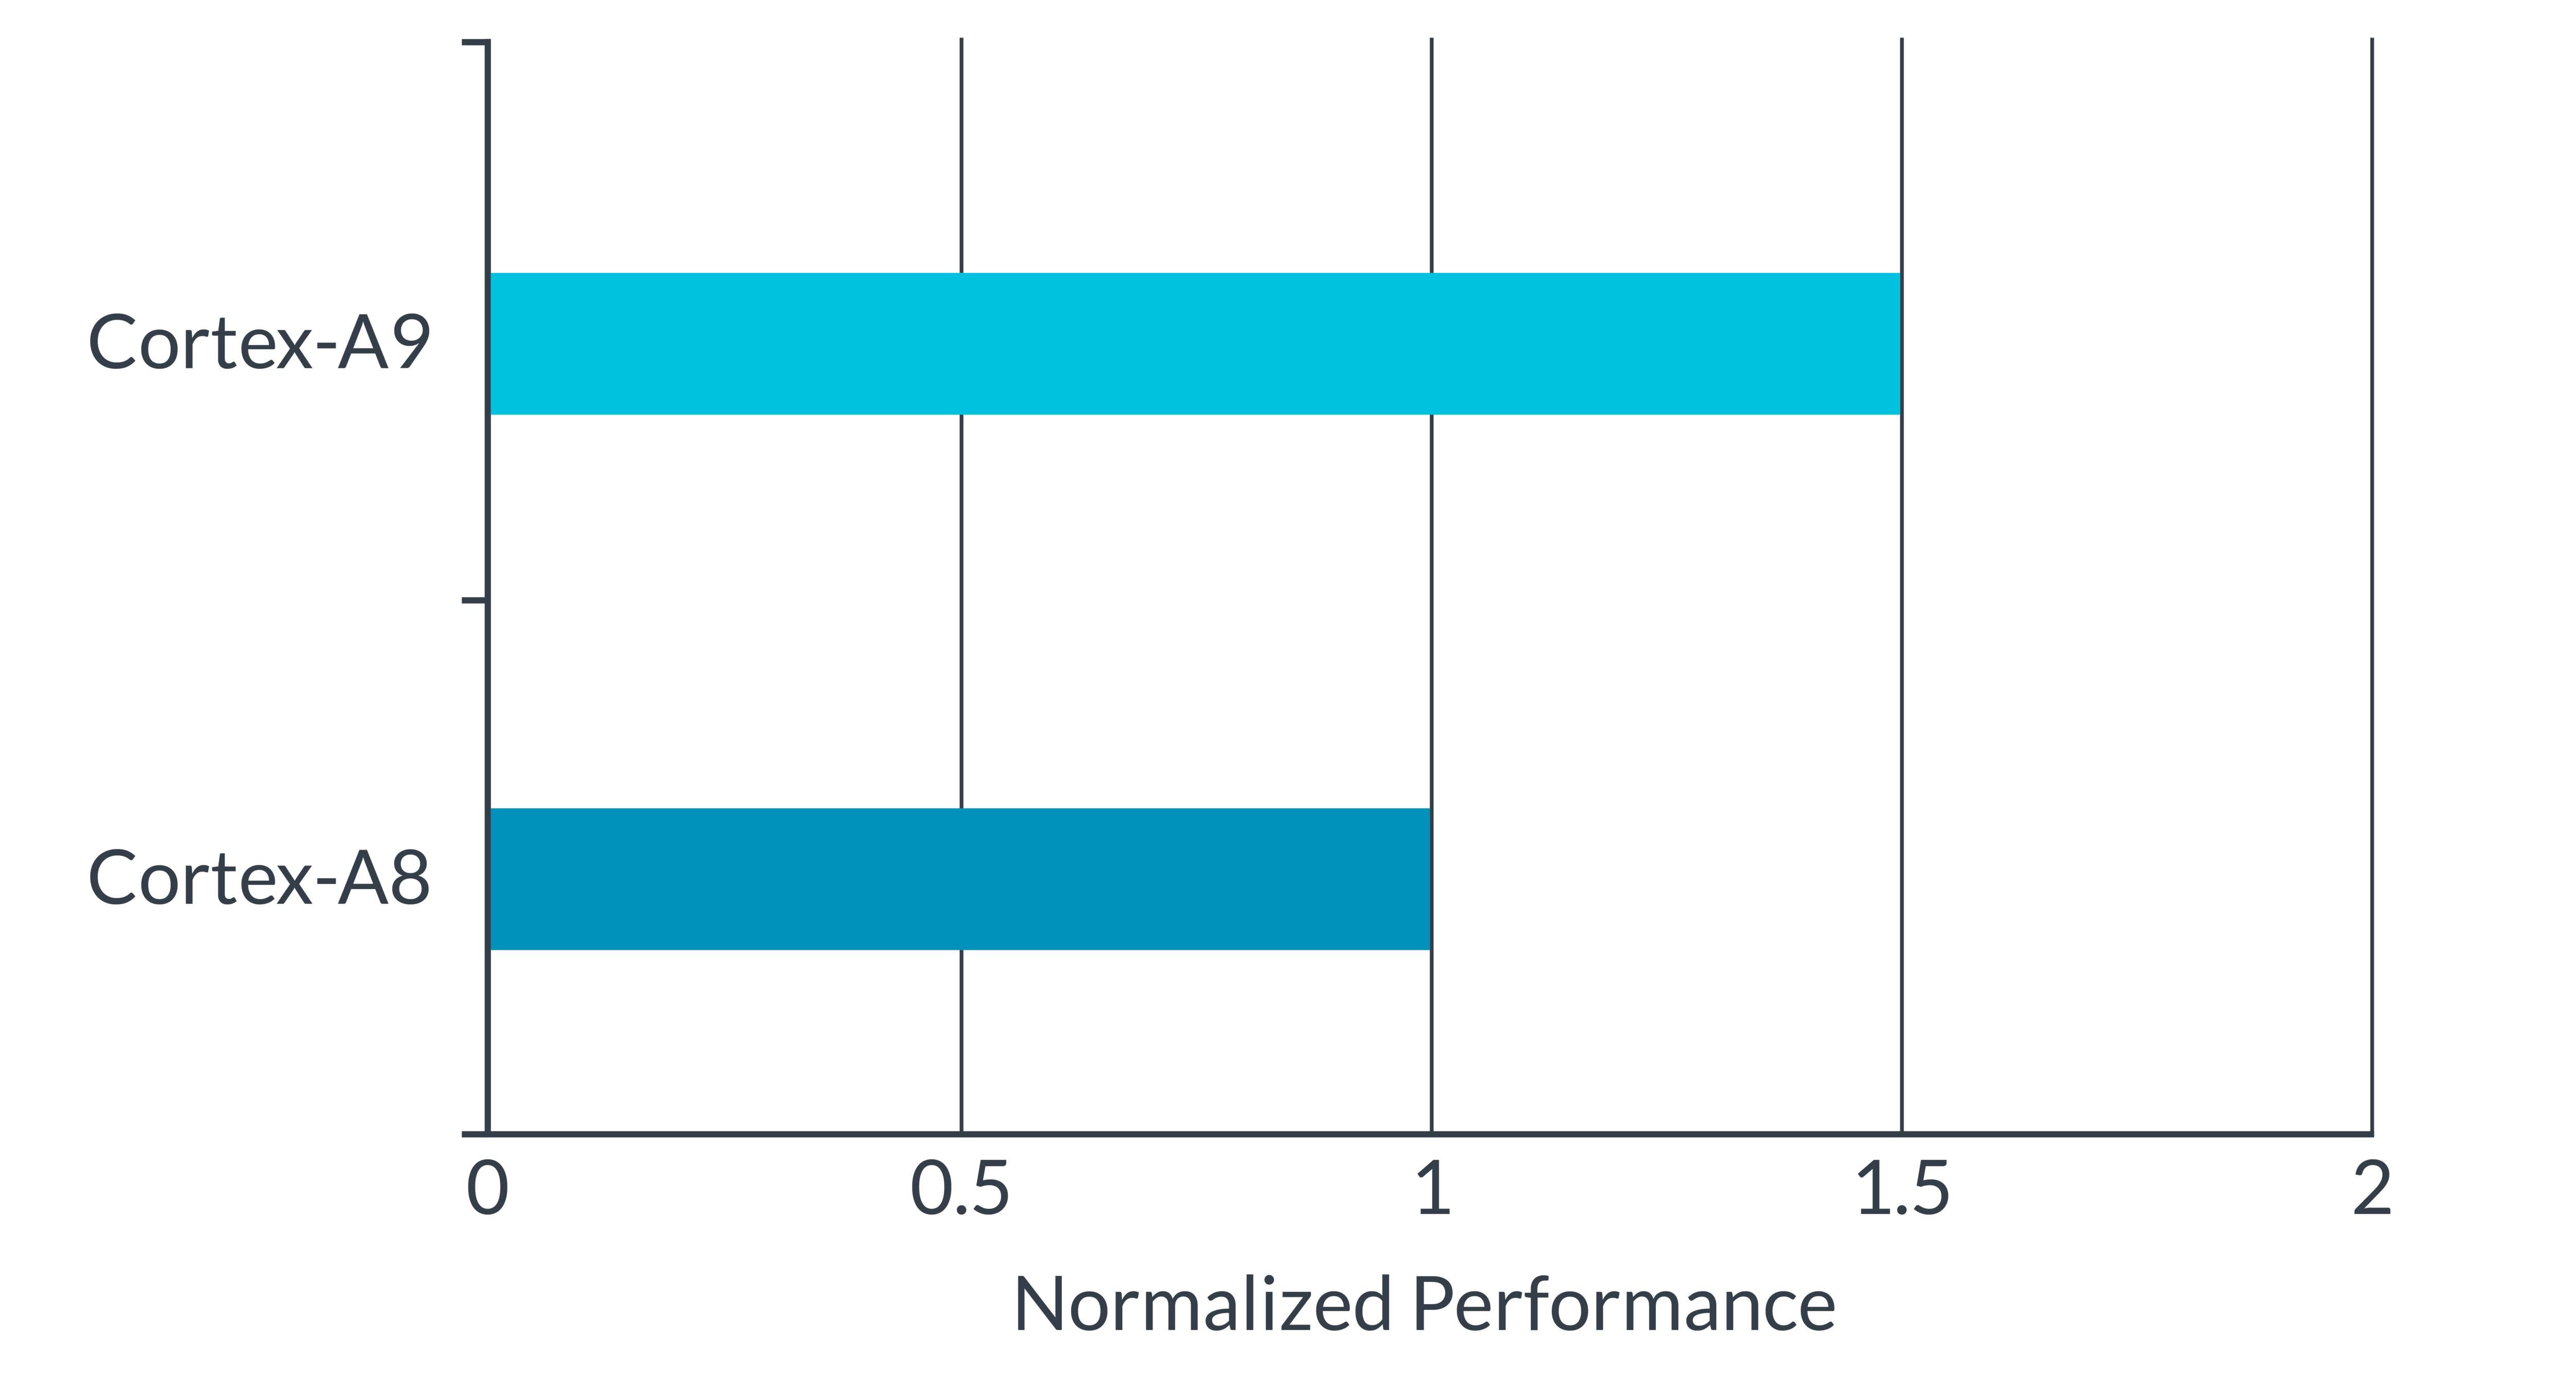 Comparing performance graph of Cortex-A9 and Cortex-A8.